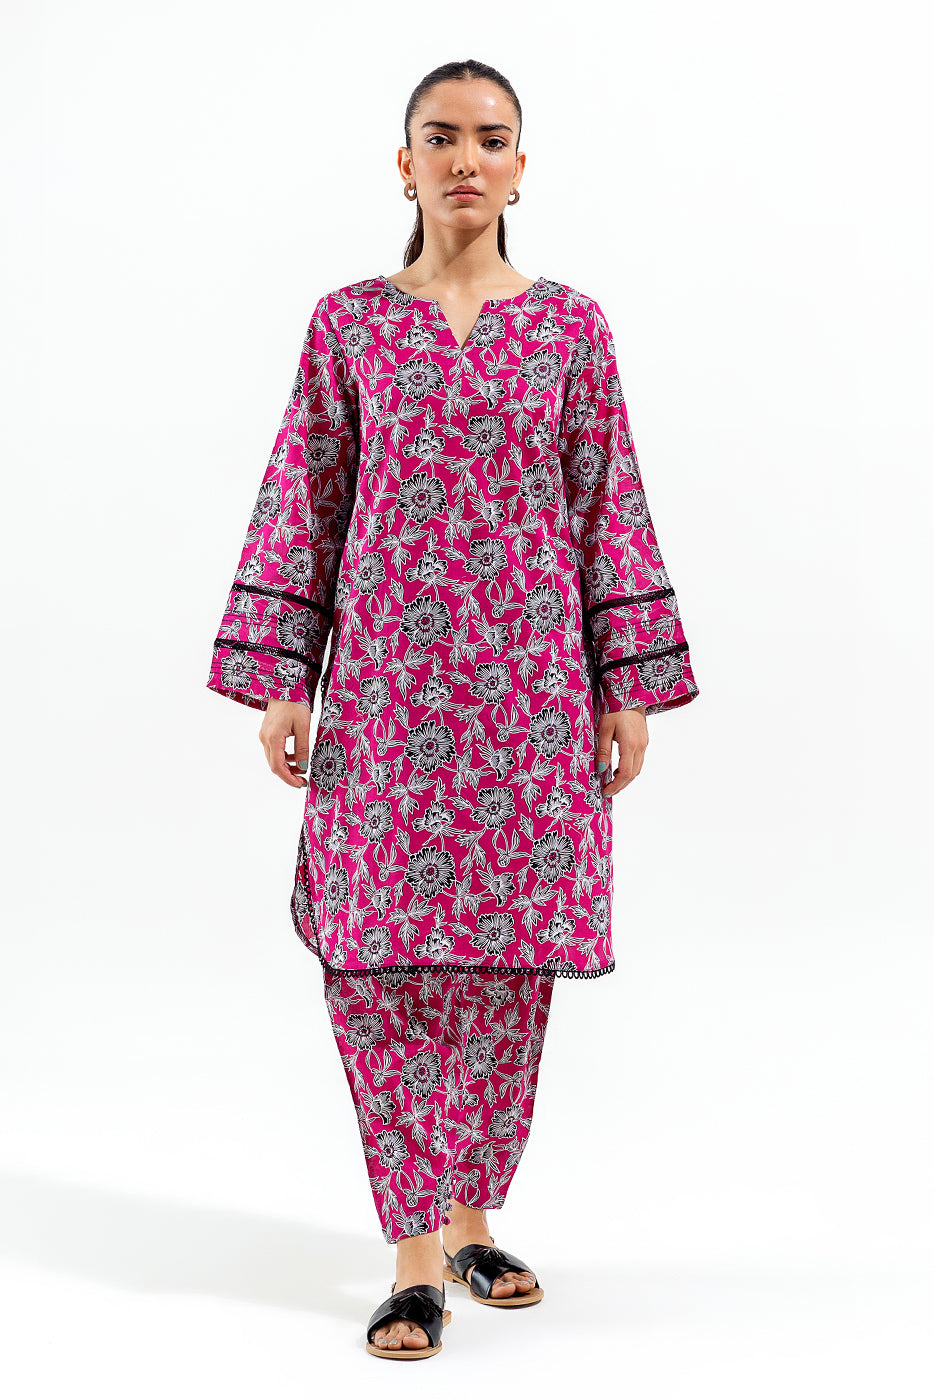 2 PIECE PRINTED ROTARY PRINT SUIT (PRET) - BEECHTREE